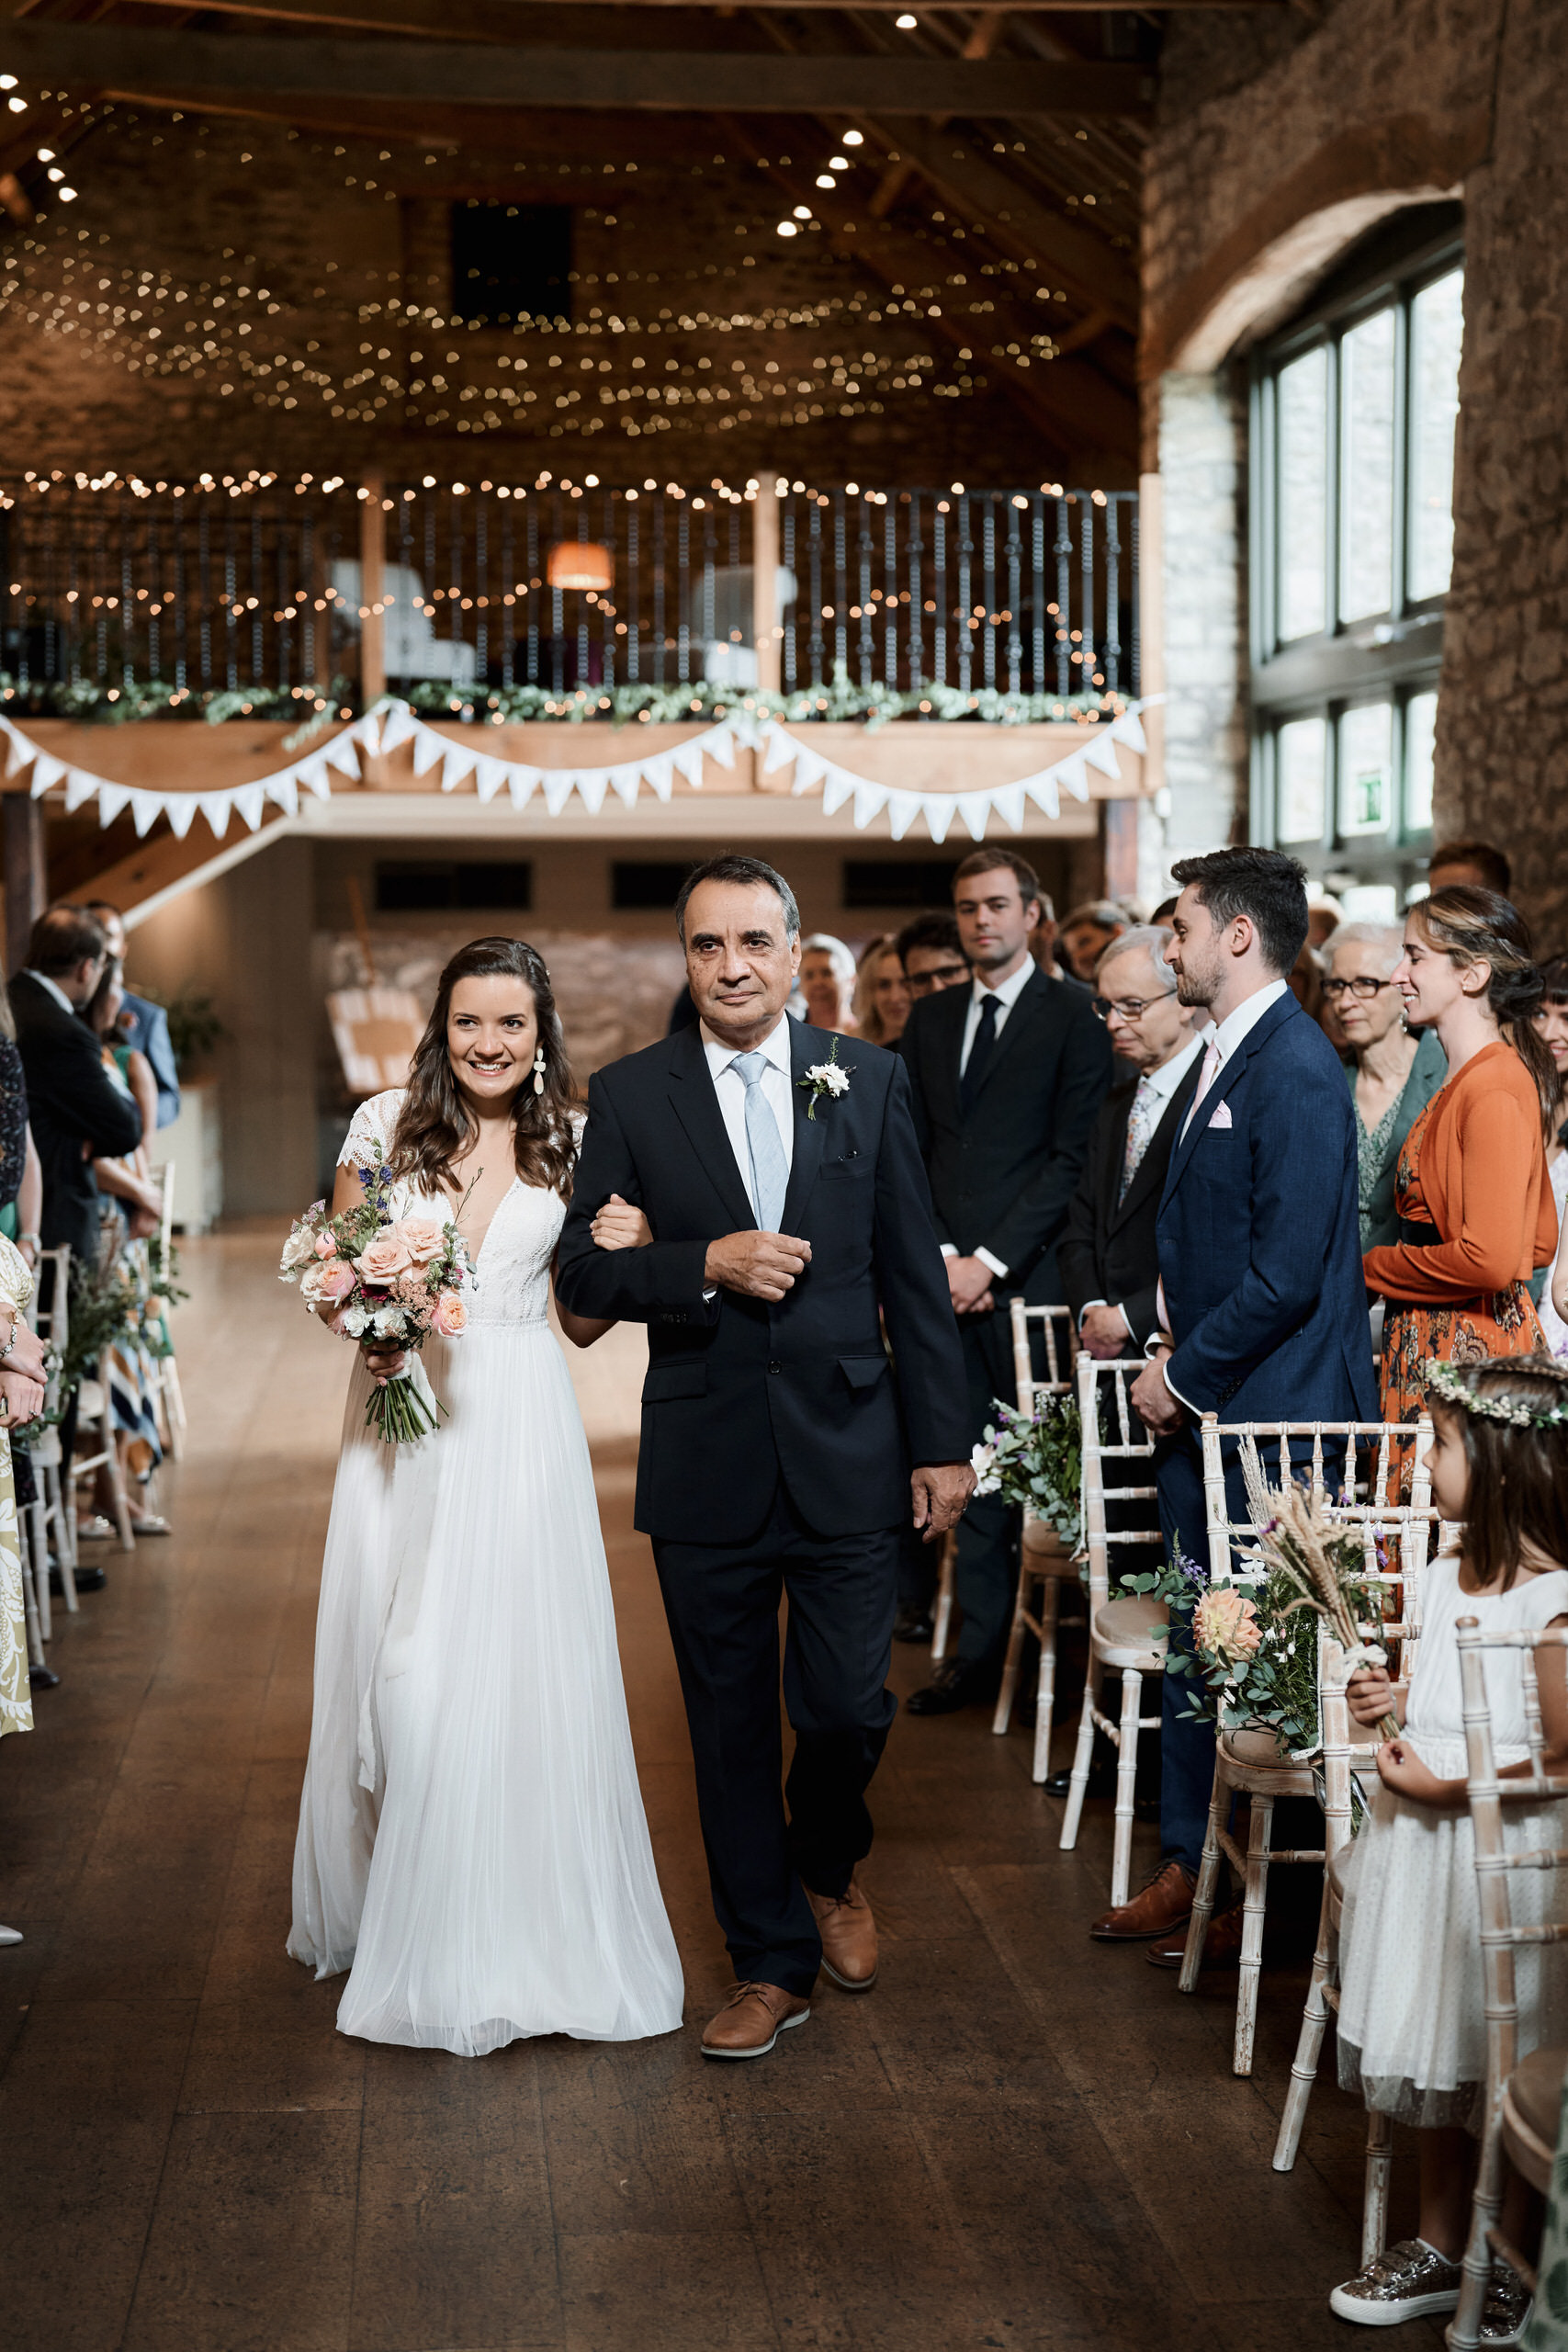 A couple is walking down the aisle at a farm-style wedding.